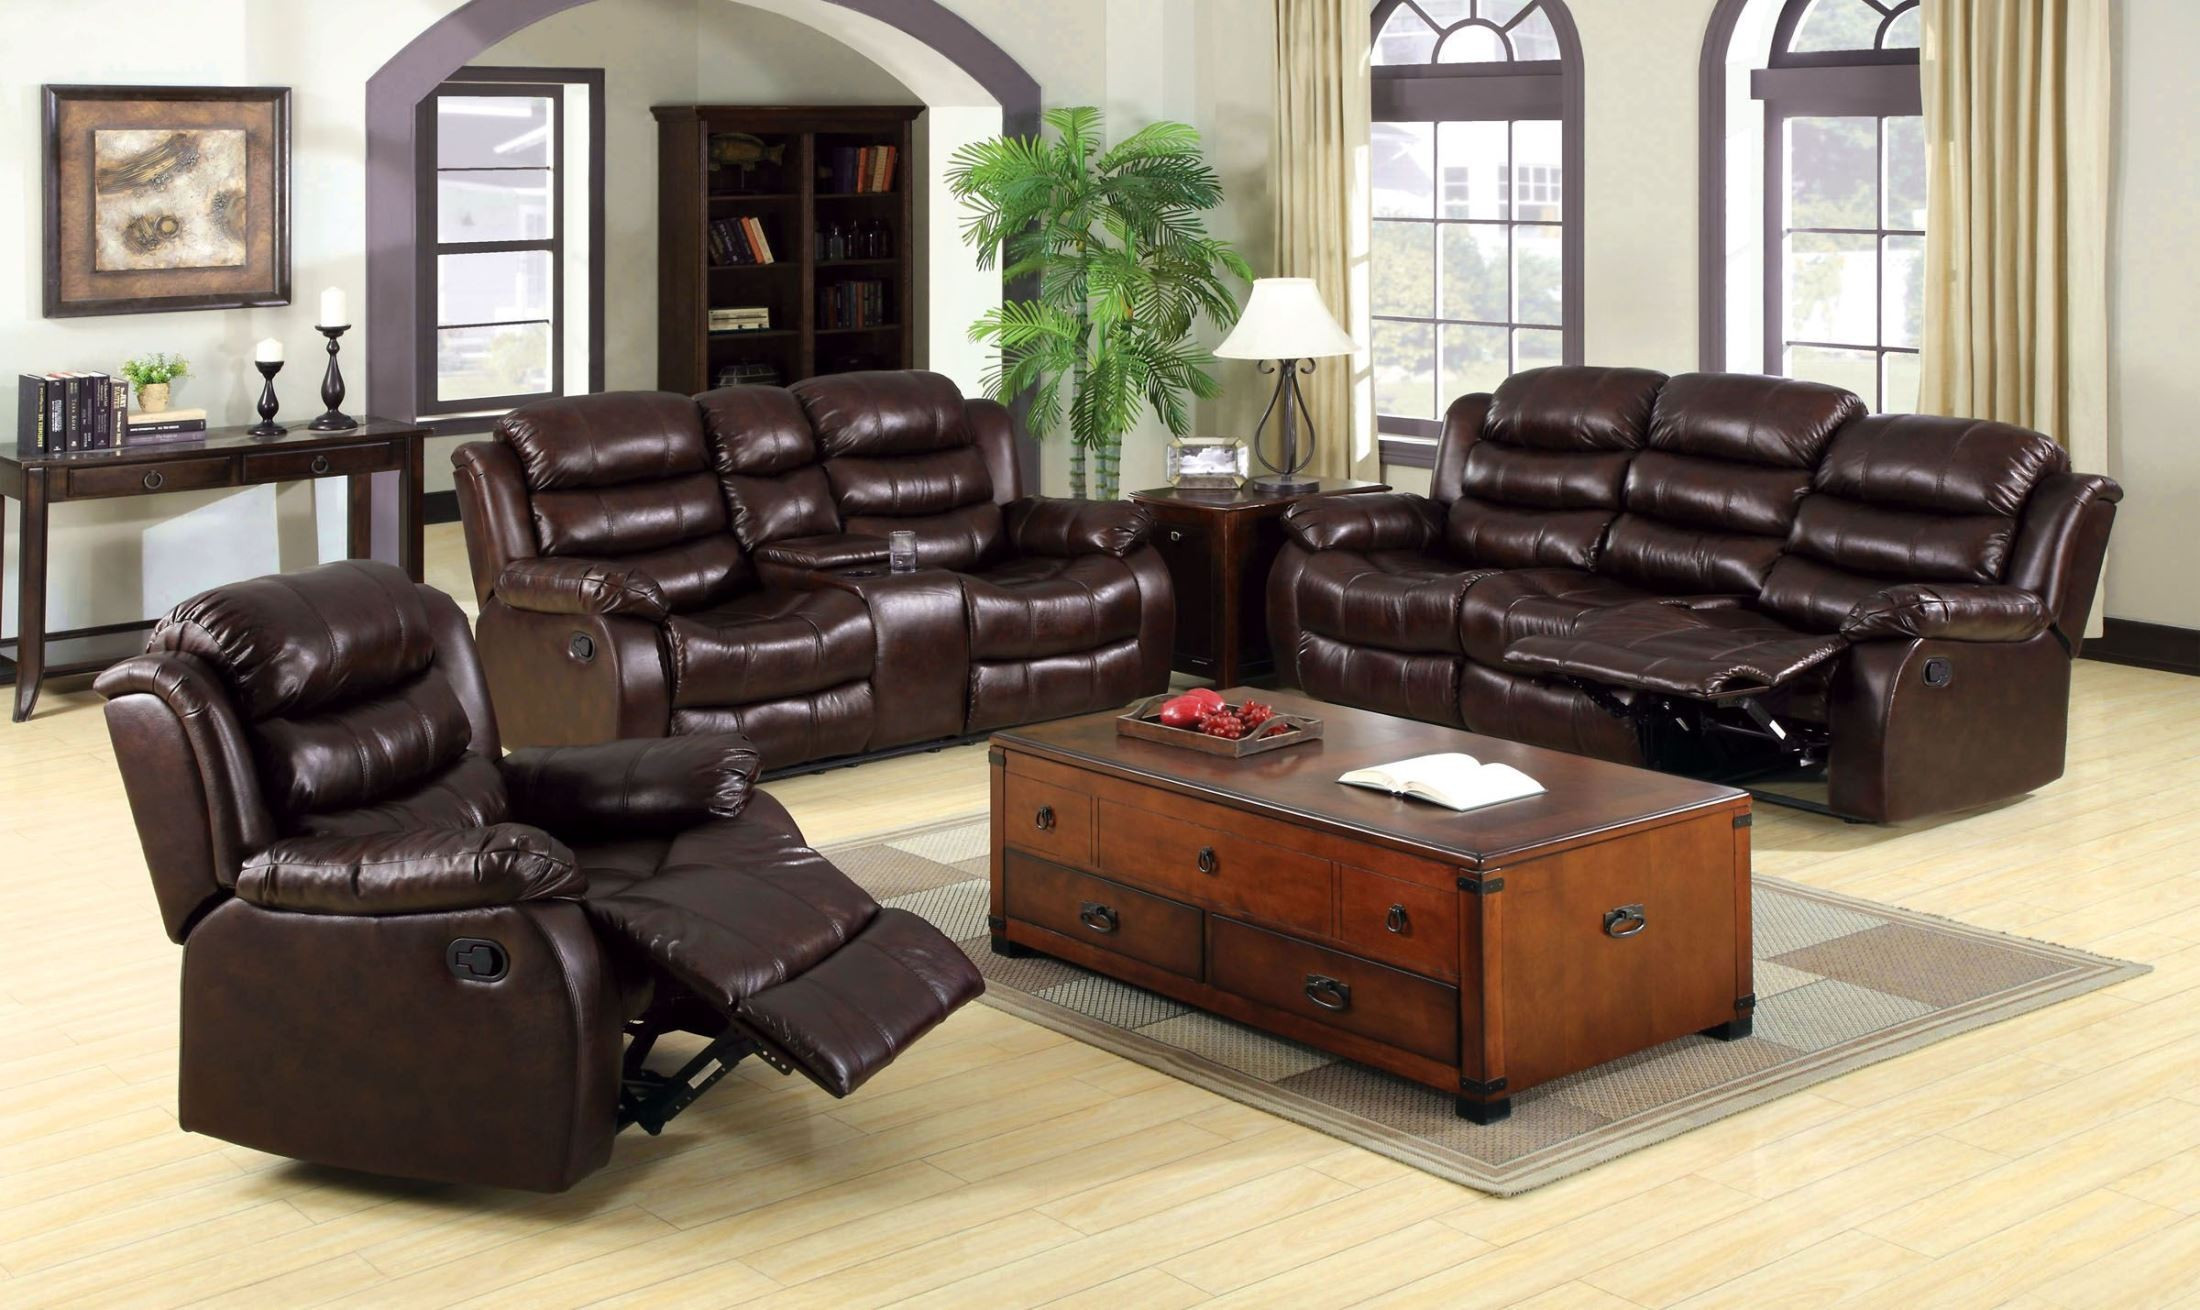 Rustic Living Room Furniture Sets
 Berkshire Rustic Brown Reclining Living Room Set from